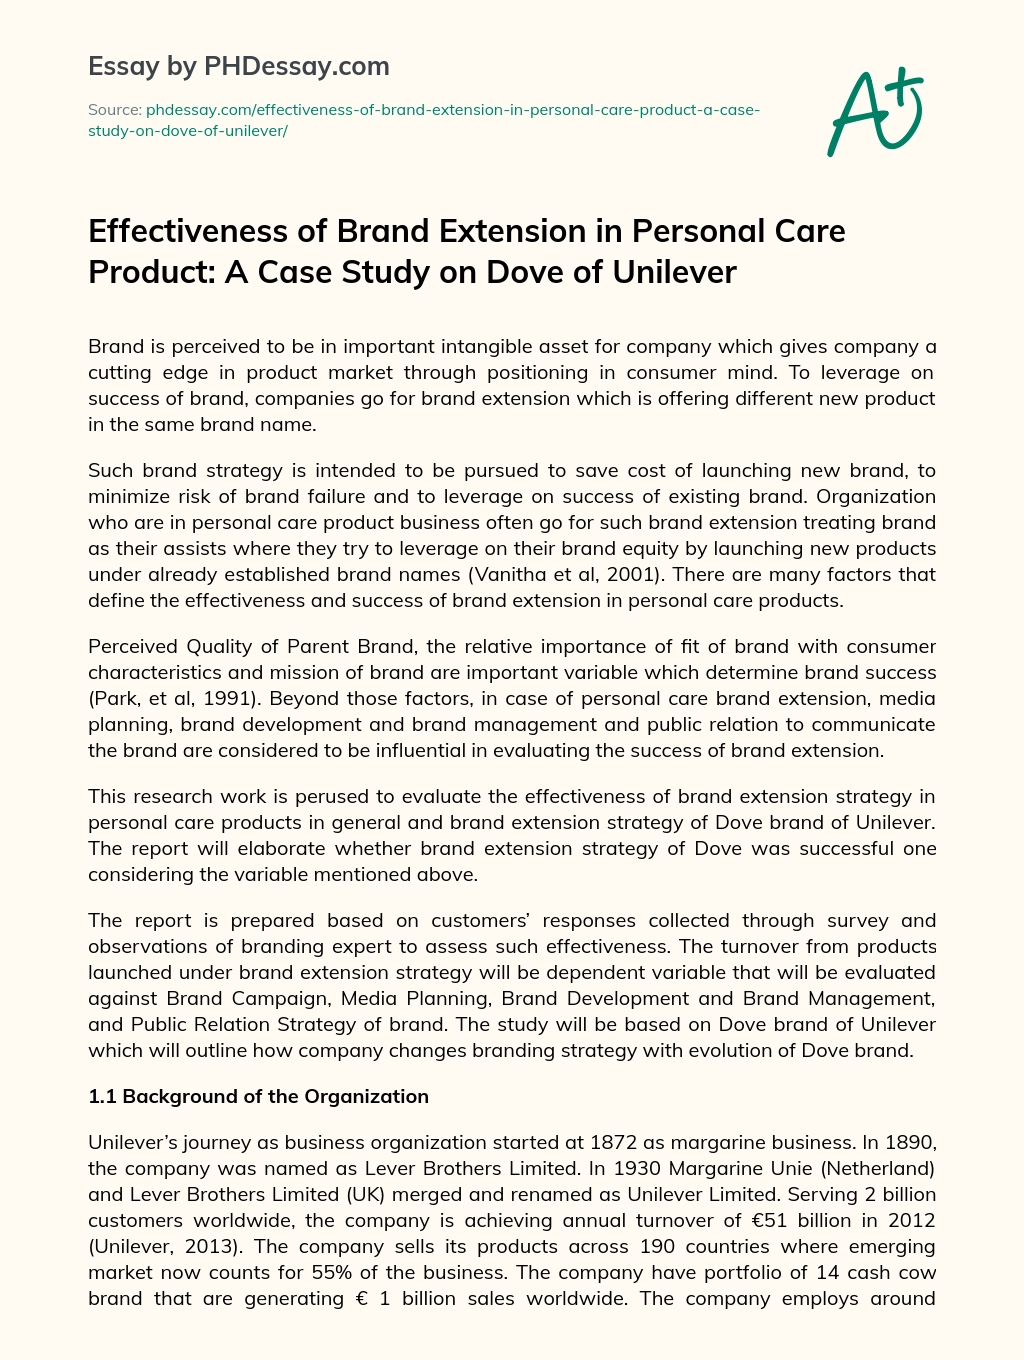 Effectiveness of Brand Extension in Personal Care Product: A Case Study on Dove of Unilever essay